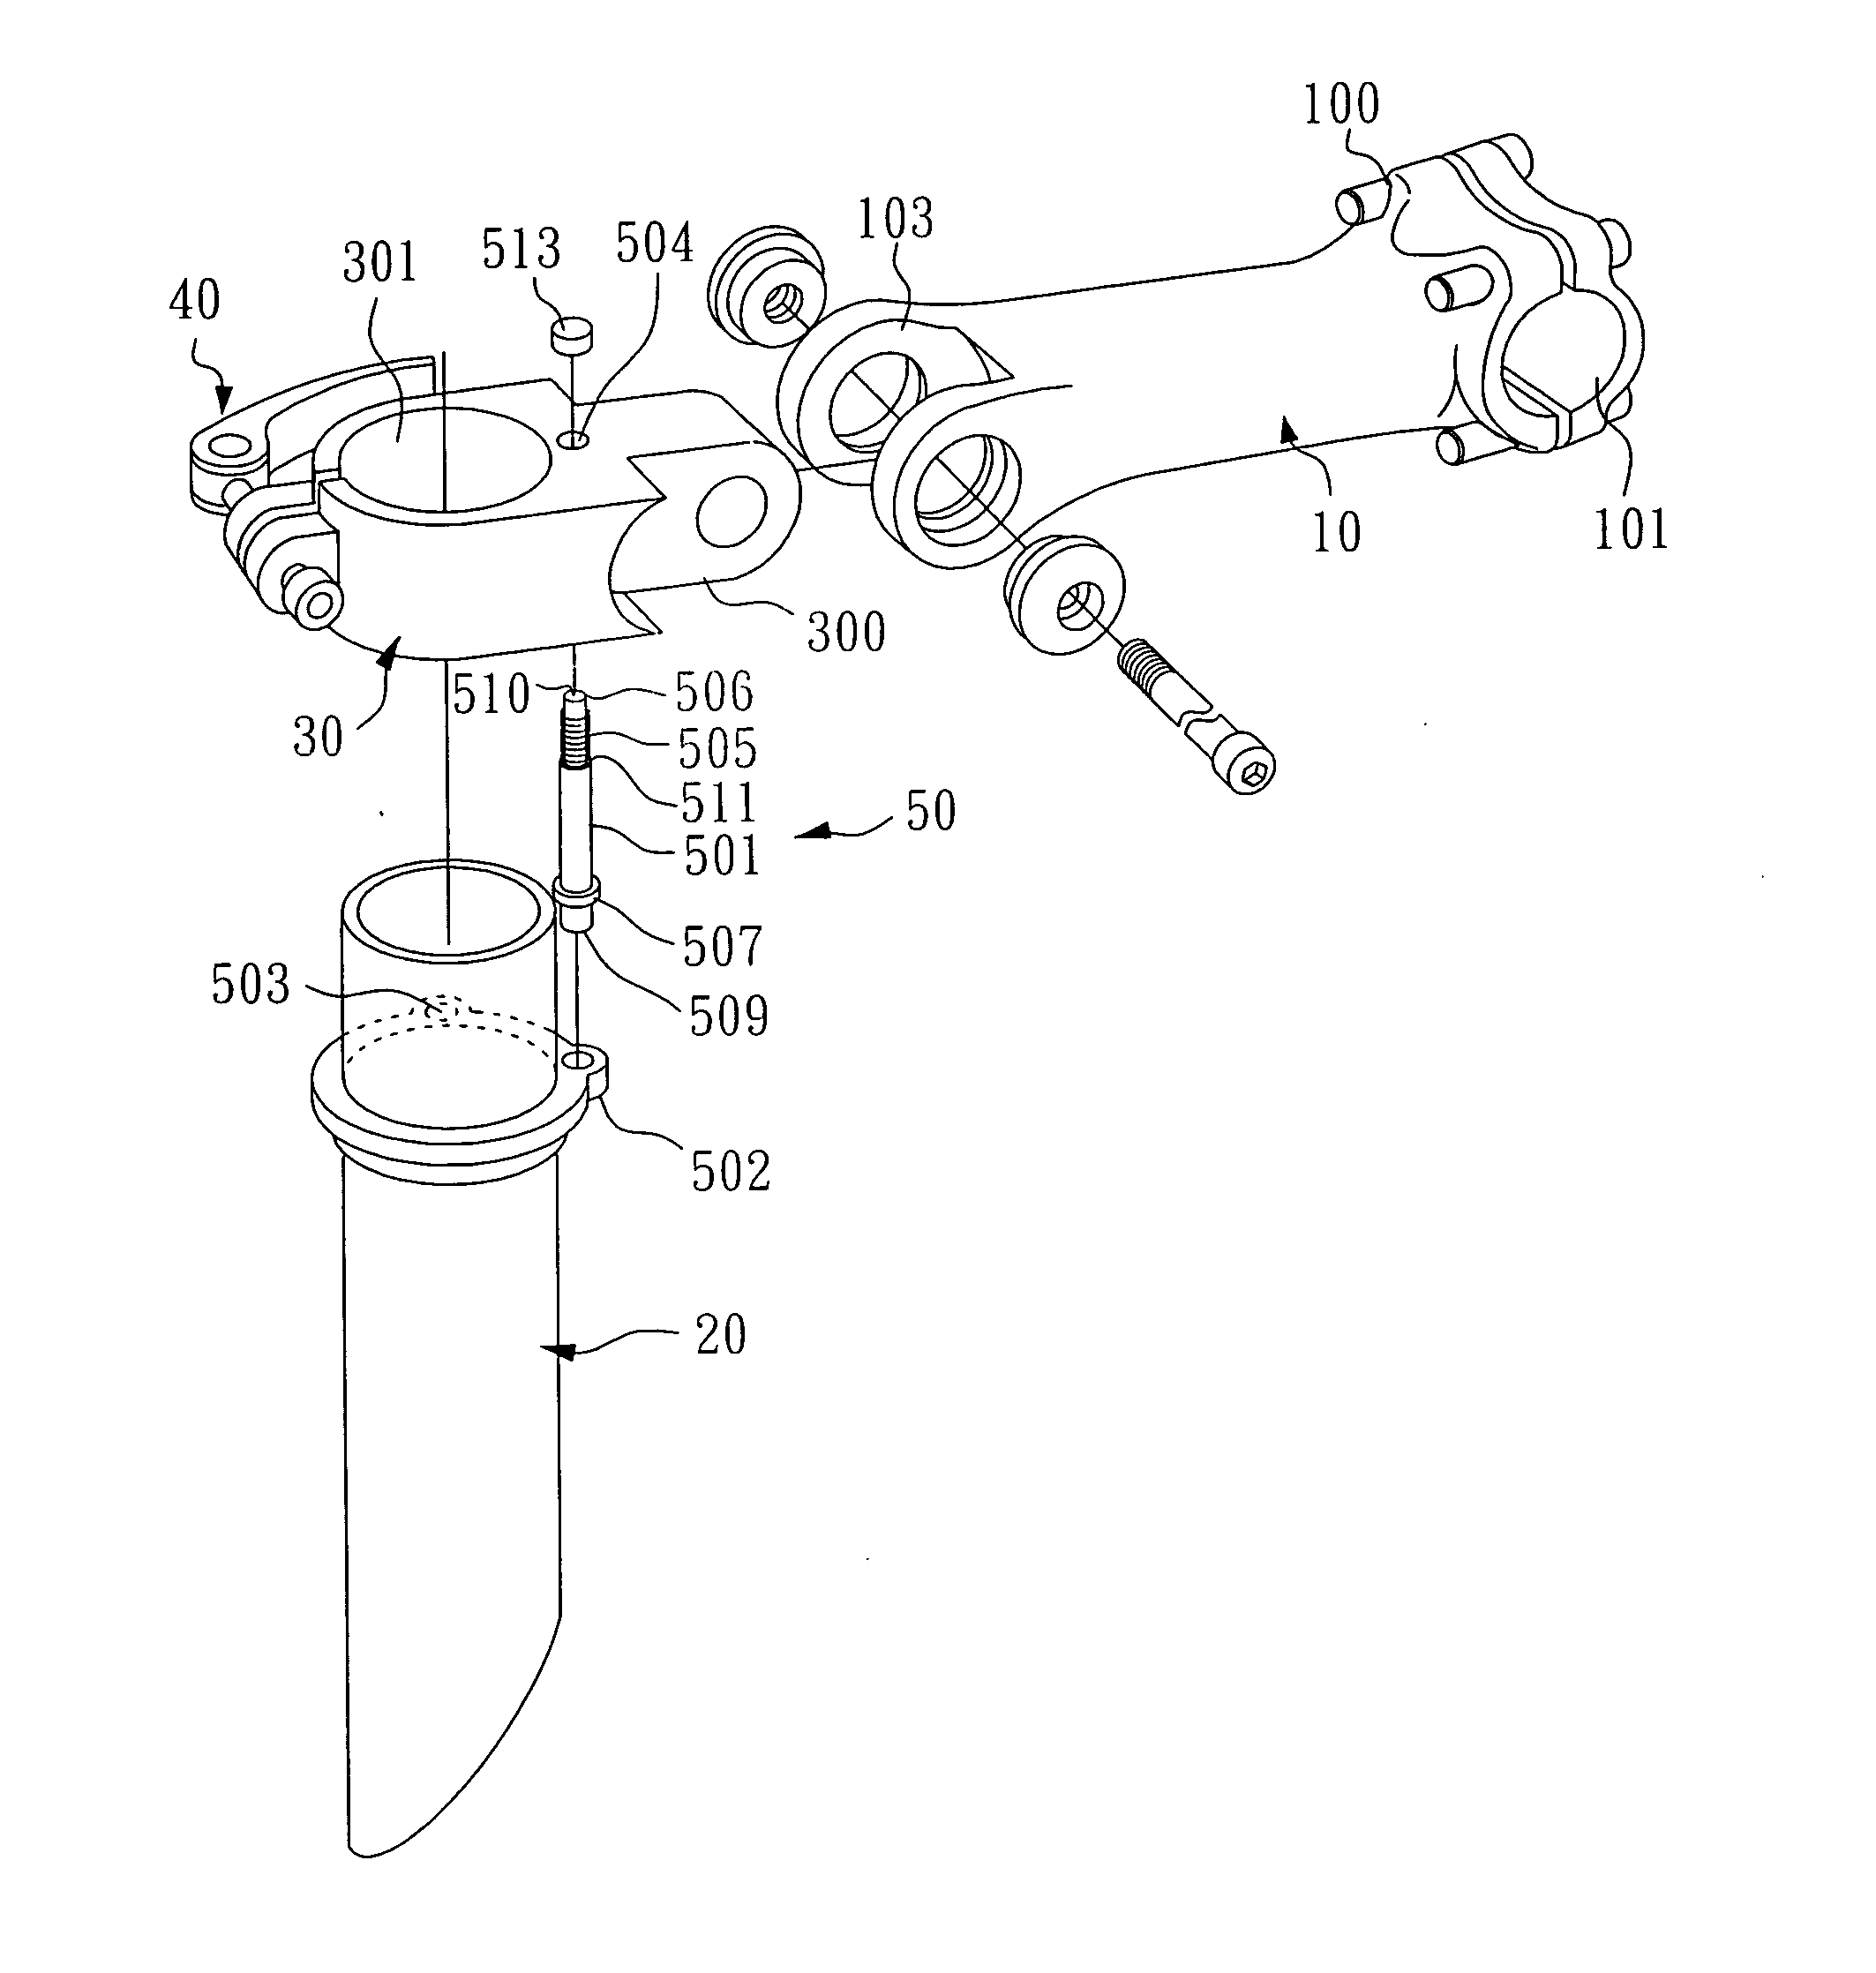 Bicycle stem having a positioning mechanism for re-positioning a handle